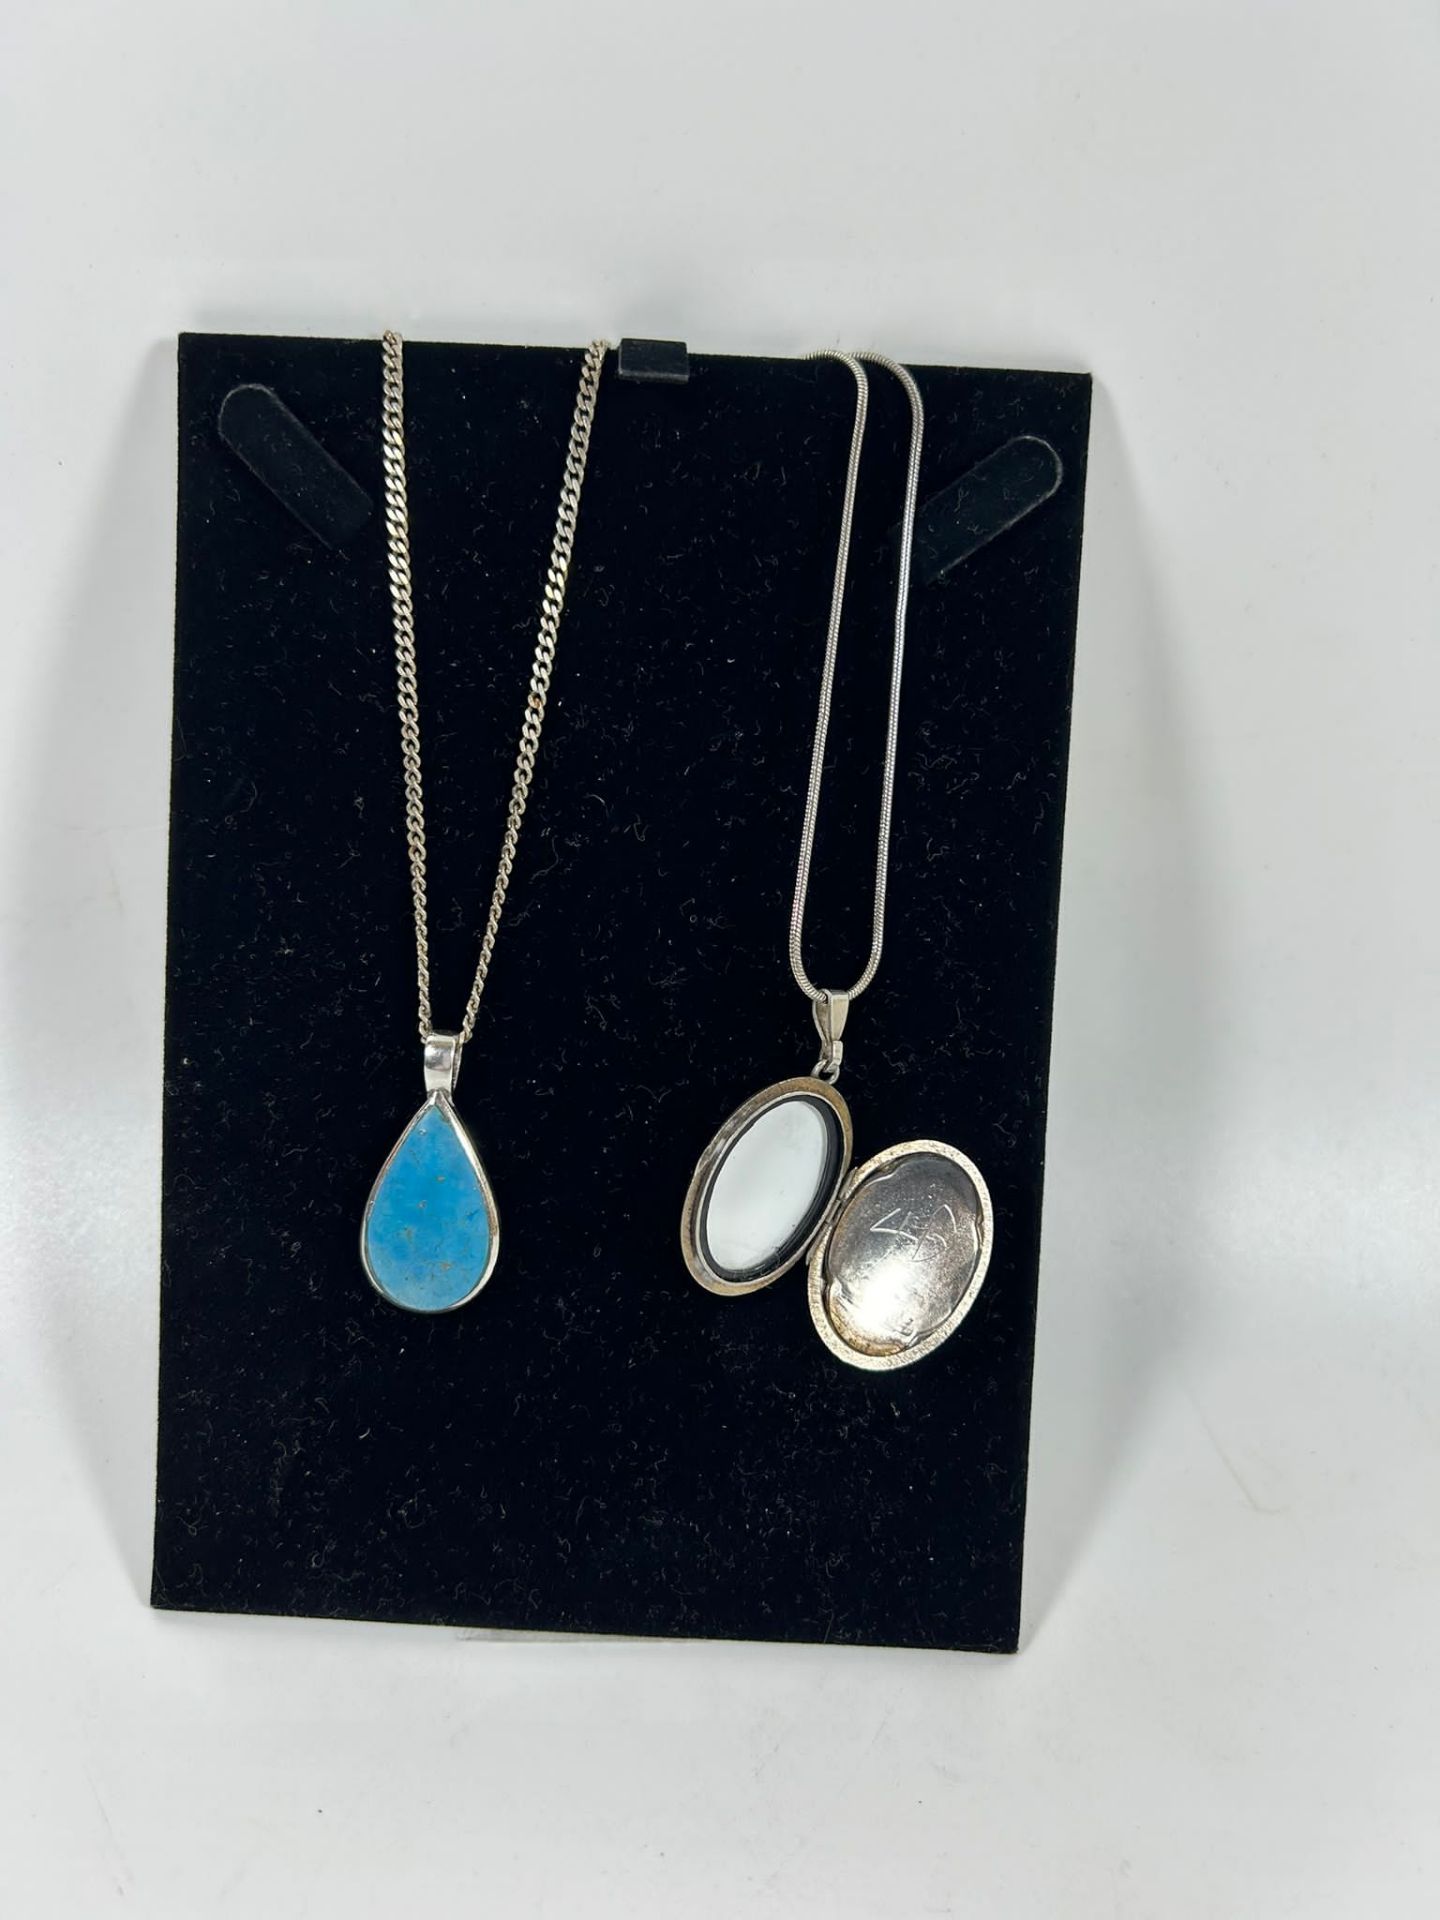 TWO .925 SILVER NECKLACES WITH BLUE STONE AND LOCKET PENDANT DESIGNS, LARGEST 20" CHAIN LENGTH - Image 2 of 6